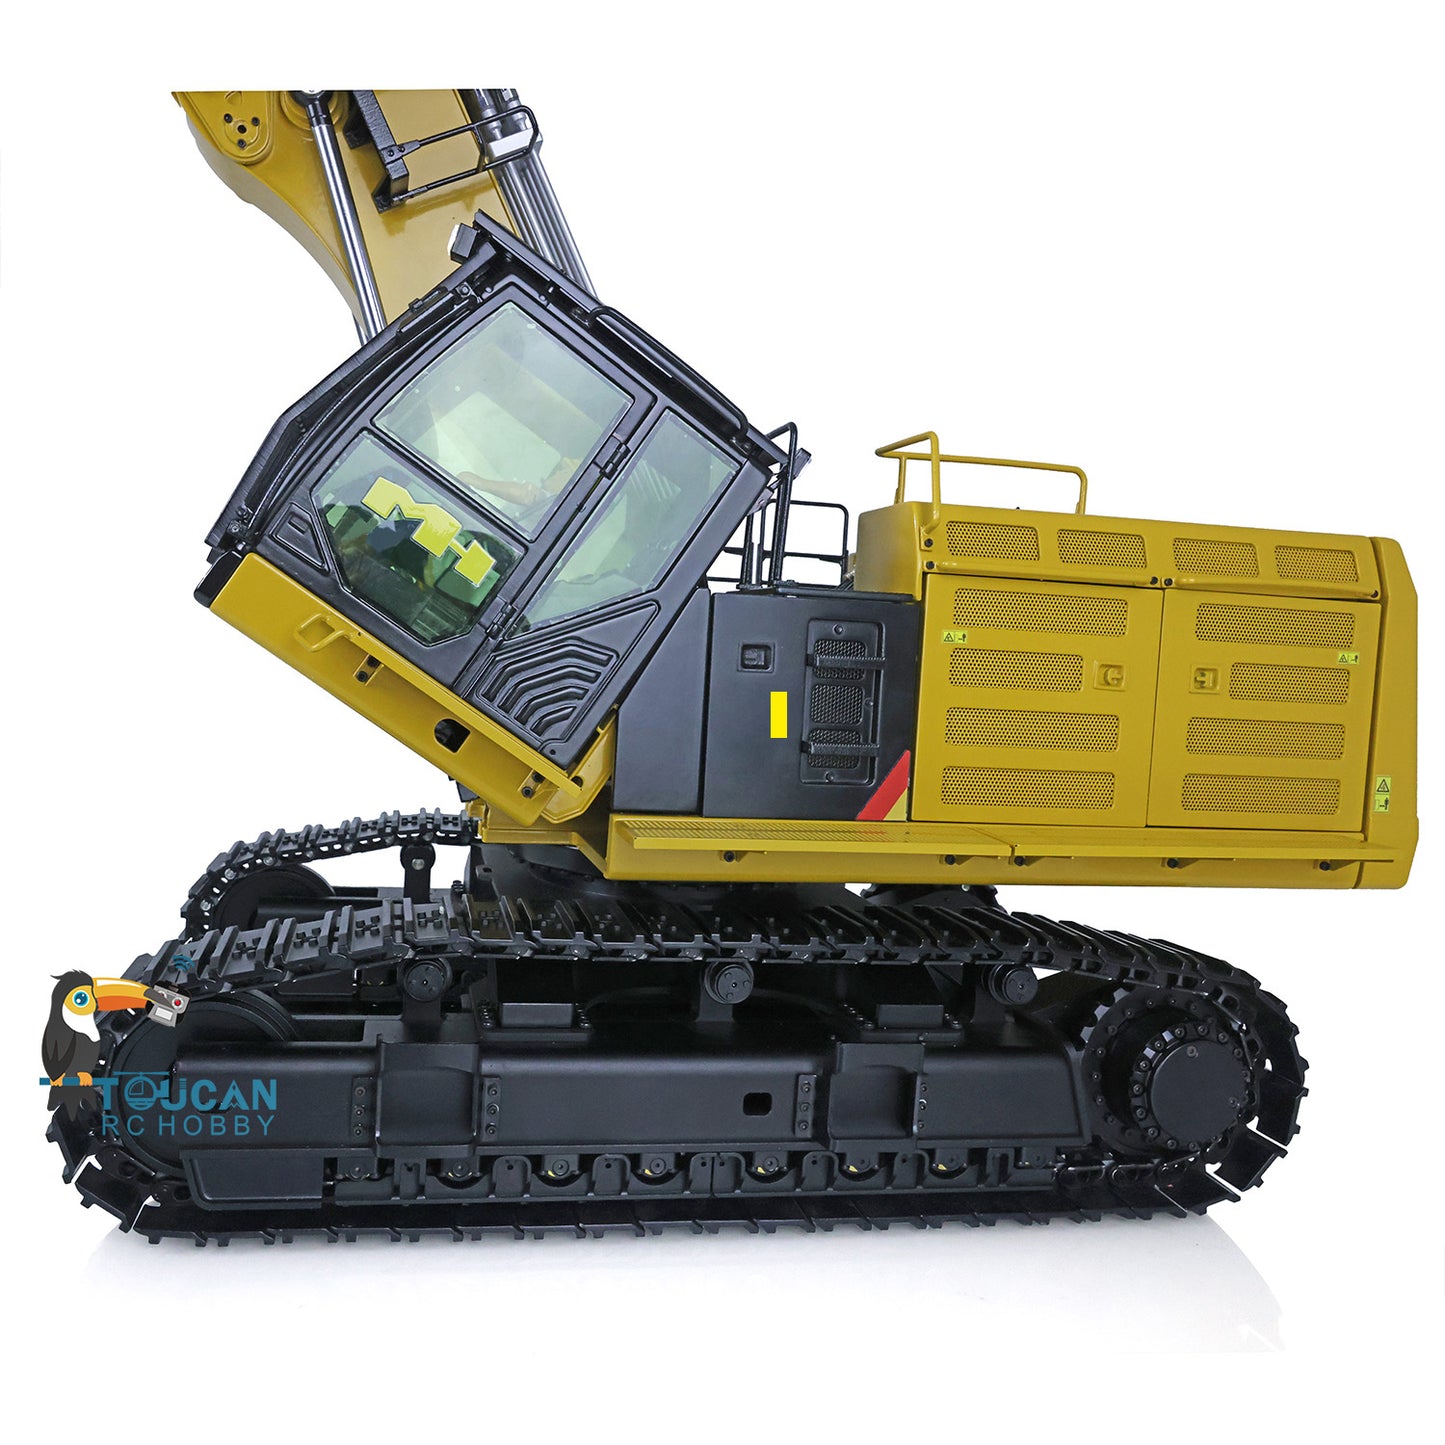 1/14 Metal Painted Assembled RC Hydraulic Demolition Excavator Remote Controlled Digger Trucks 374 UHD 2pcs Boom+1pc Arm